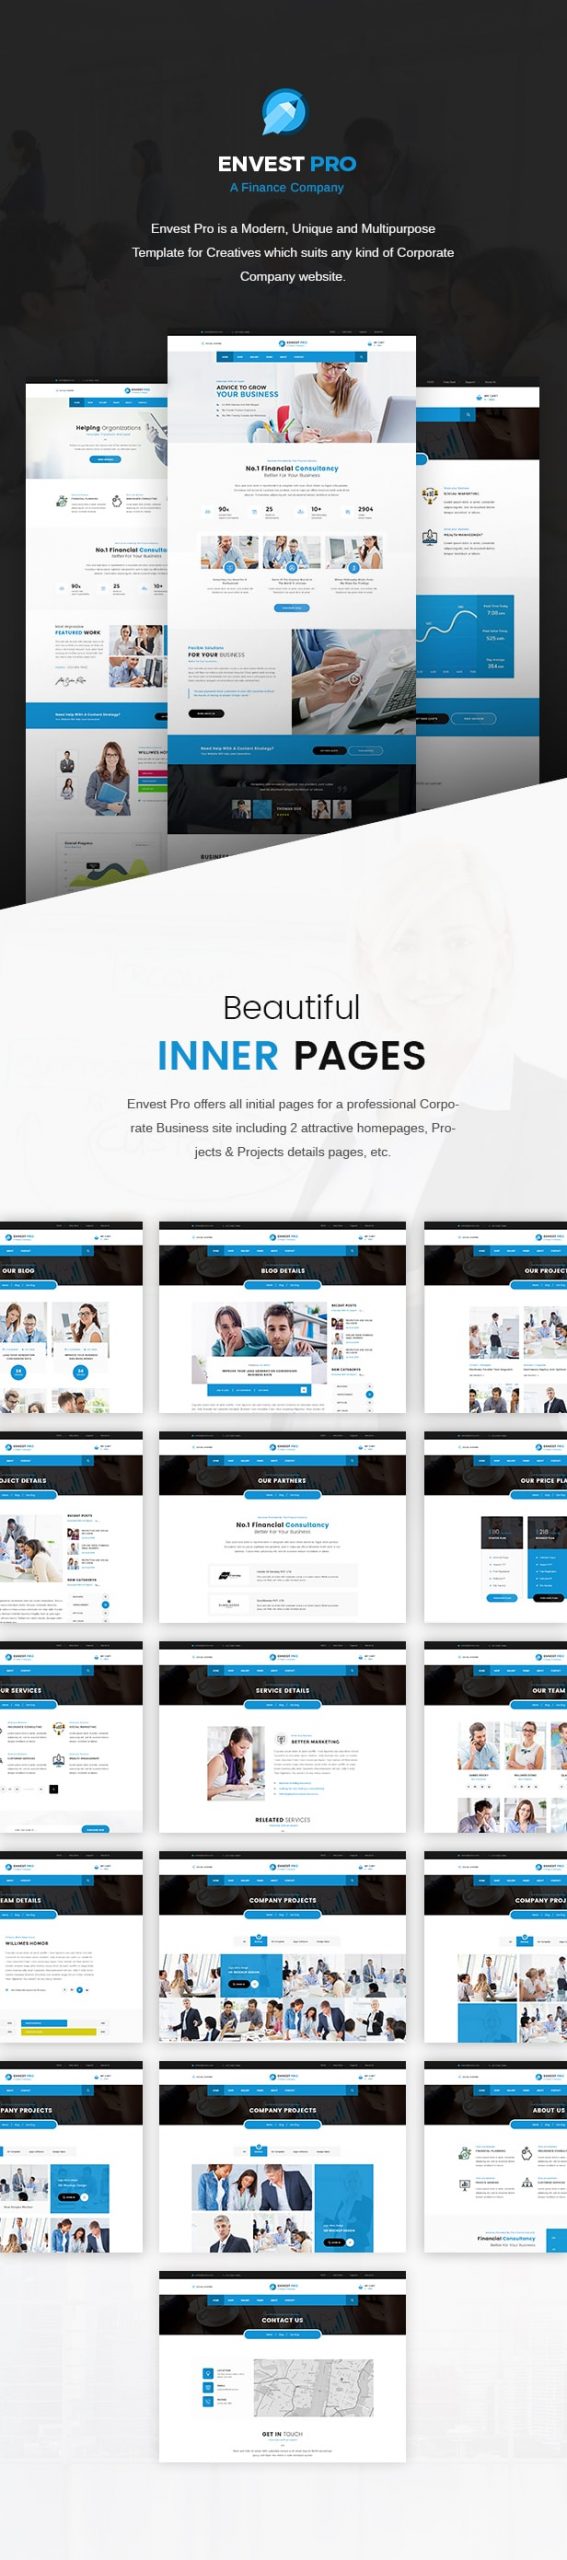 Envest Pro - Corporate Adobe Muse Template - 1